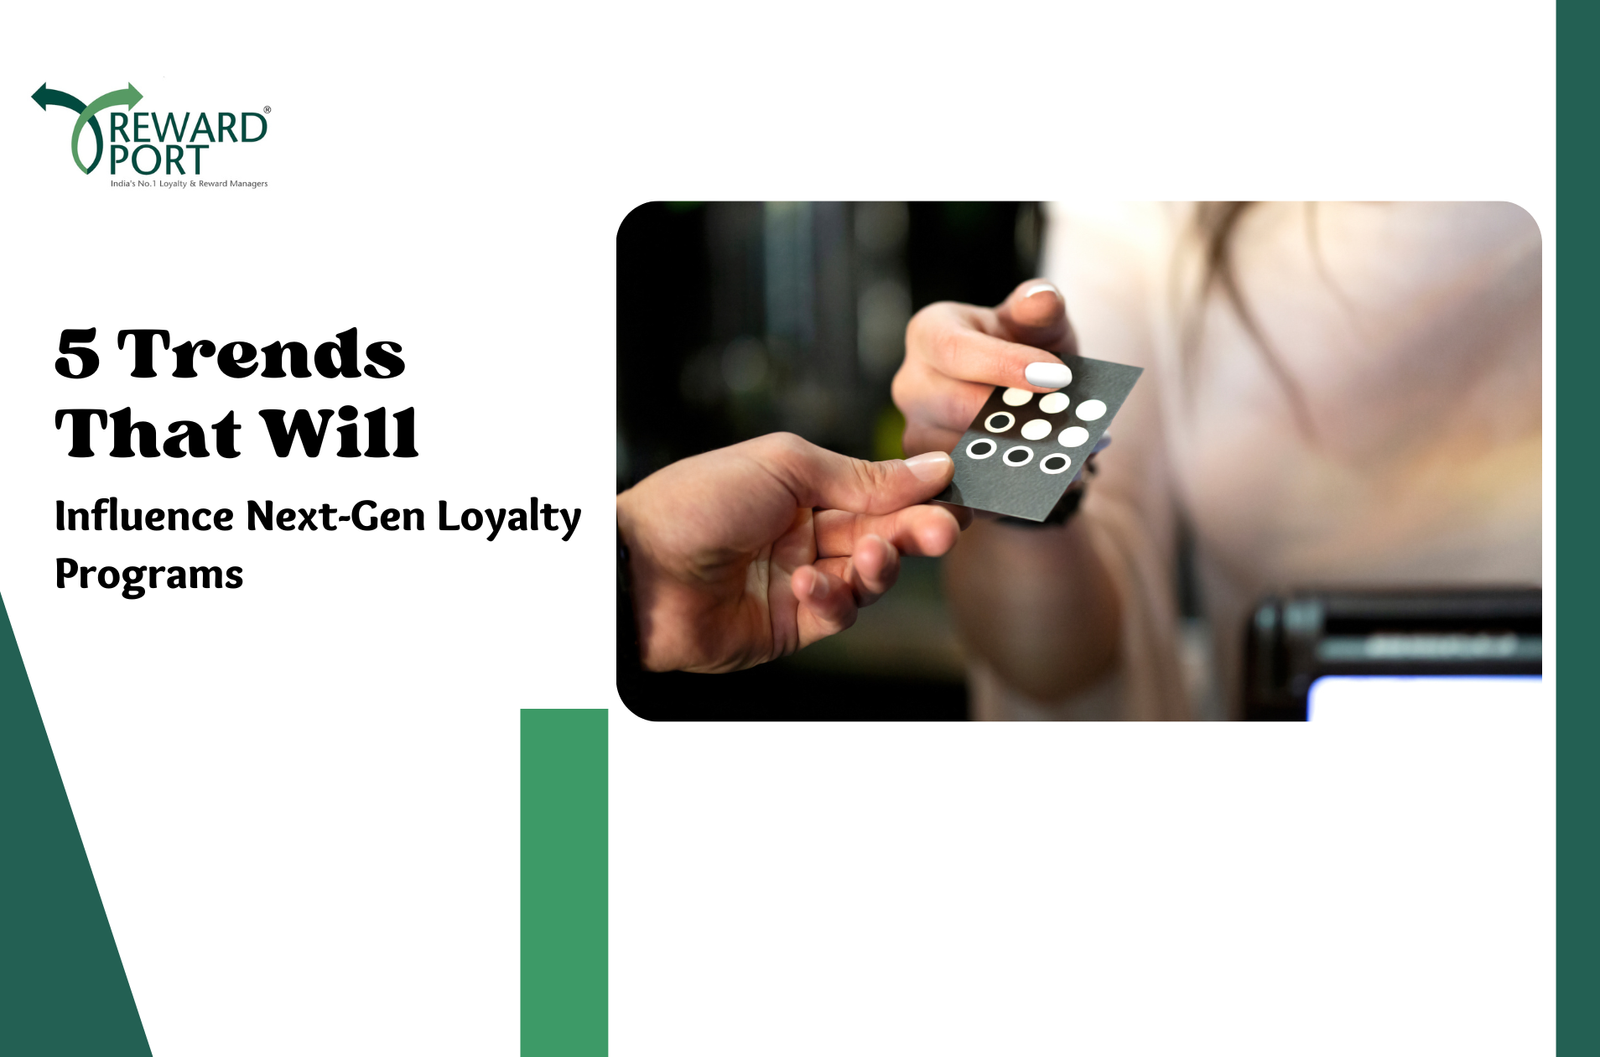 5 Trends to Influence Next-Gen Loyalty Programs